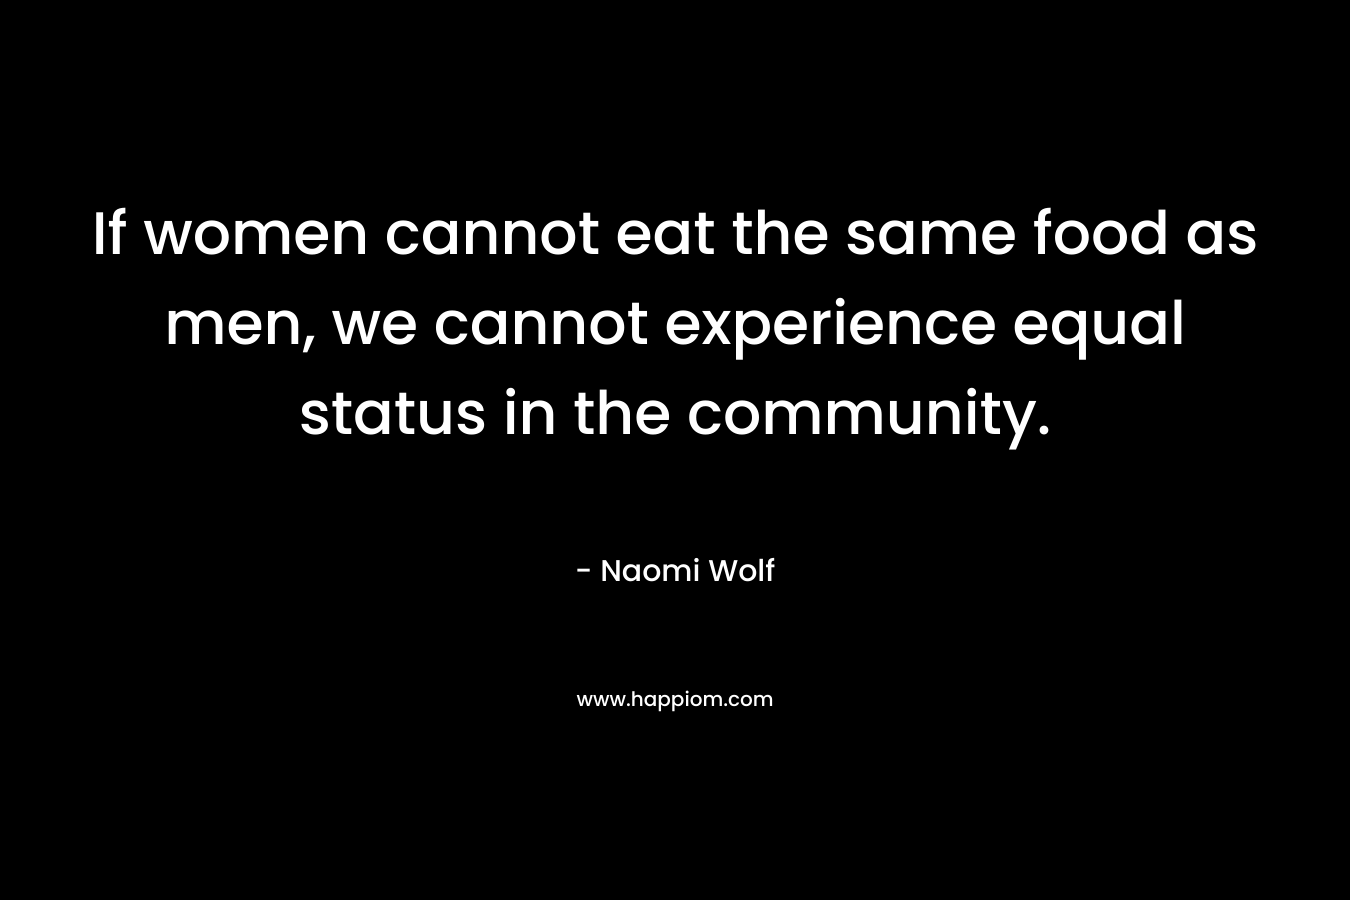 If women cannot eat the same food as men, we cannot experience equal status in the community. – Naomi Wolf